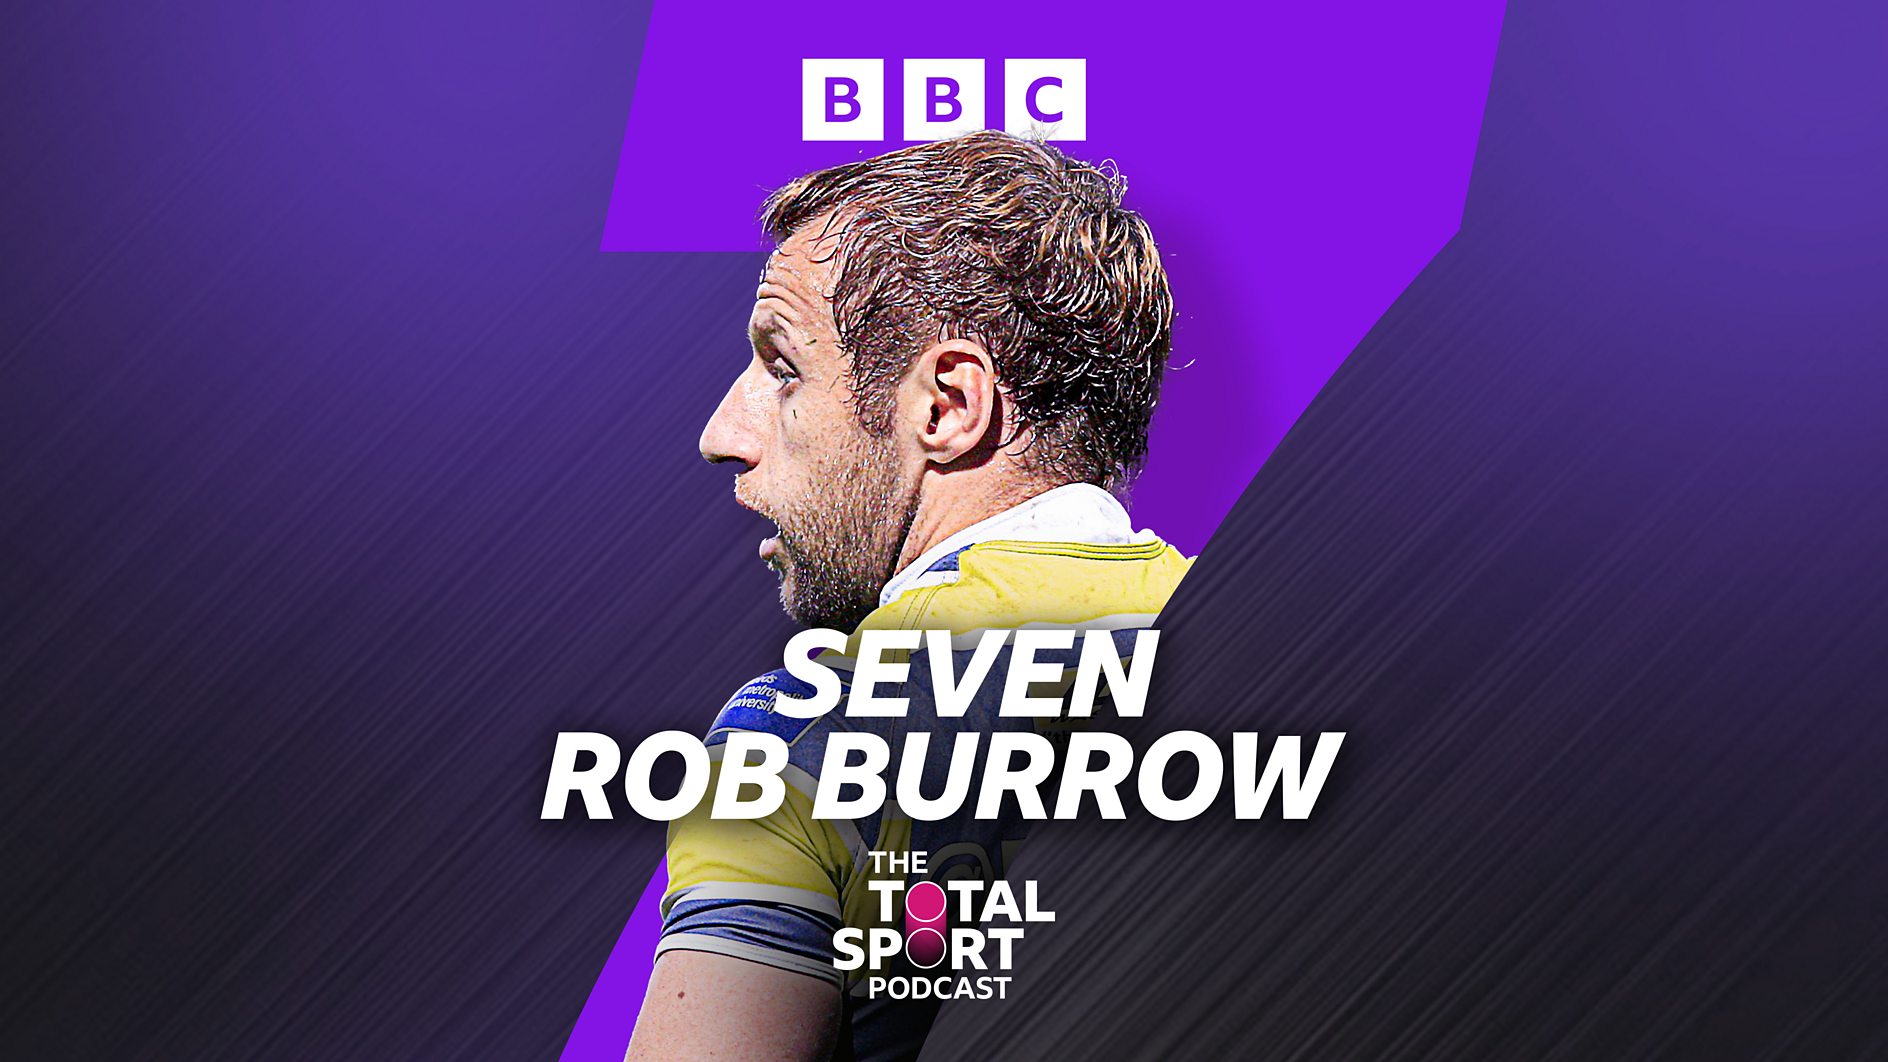 New BBC Local podcast Seven: Rob Burrow showcases inspirational stories from sporting greats